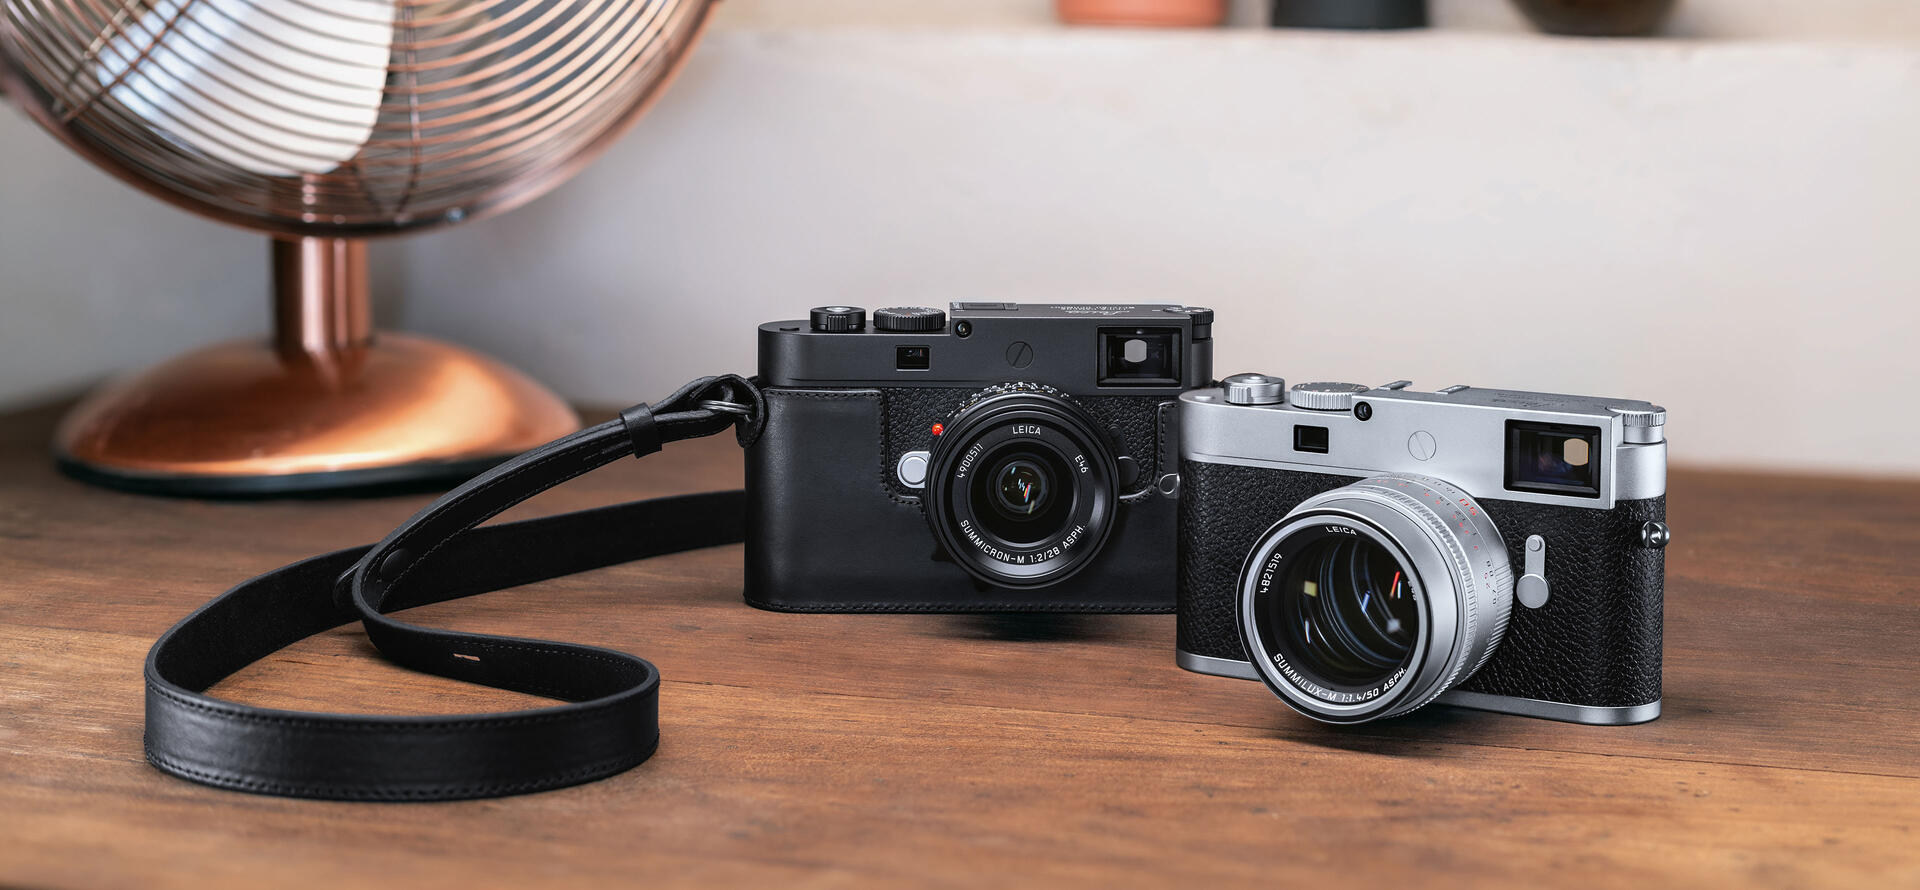 A Complete Leica M System for $3,999